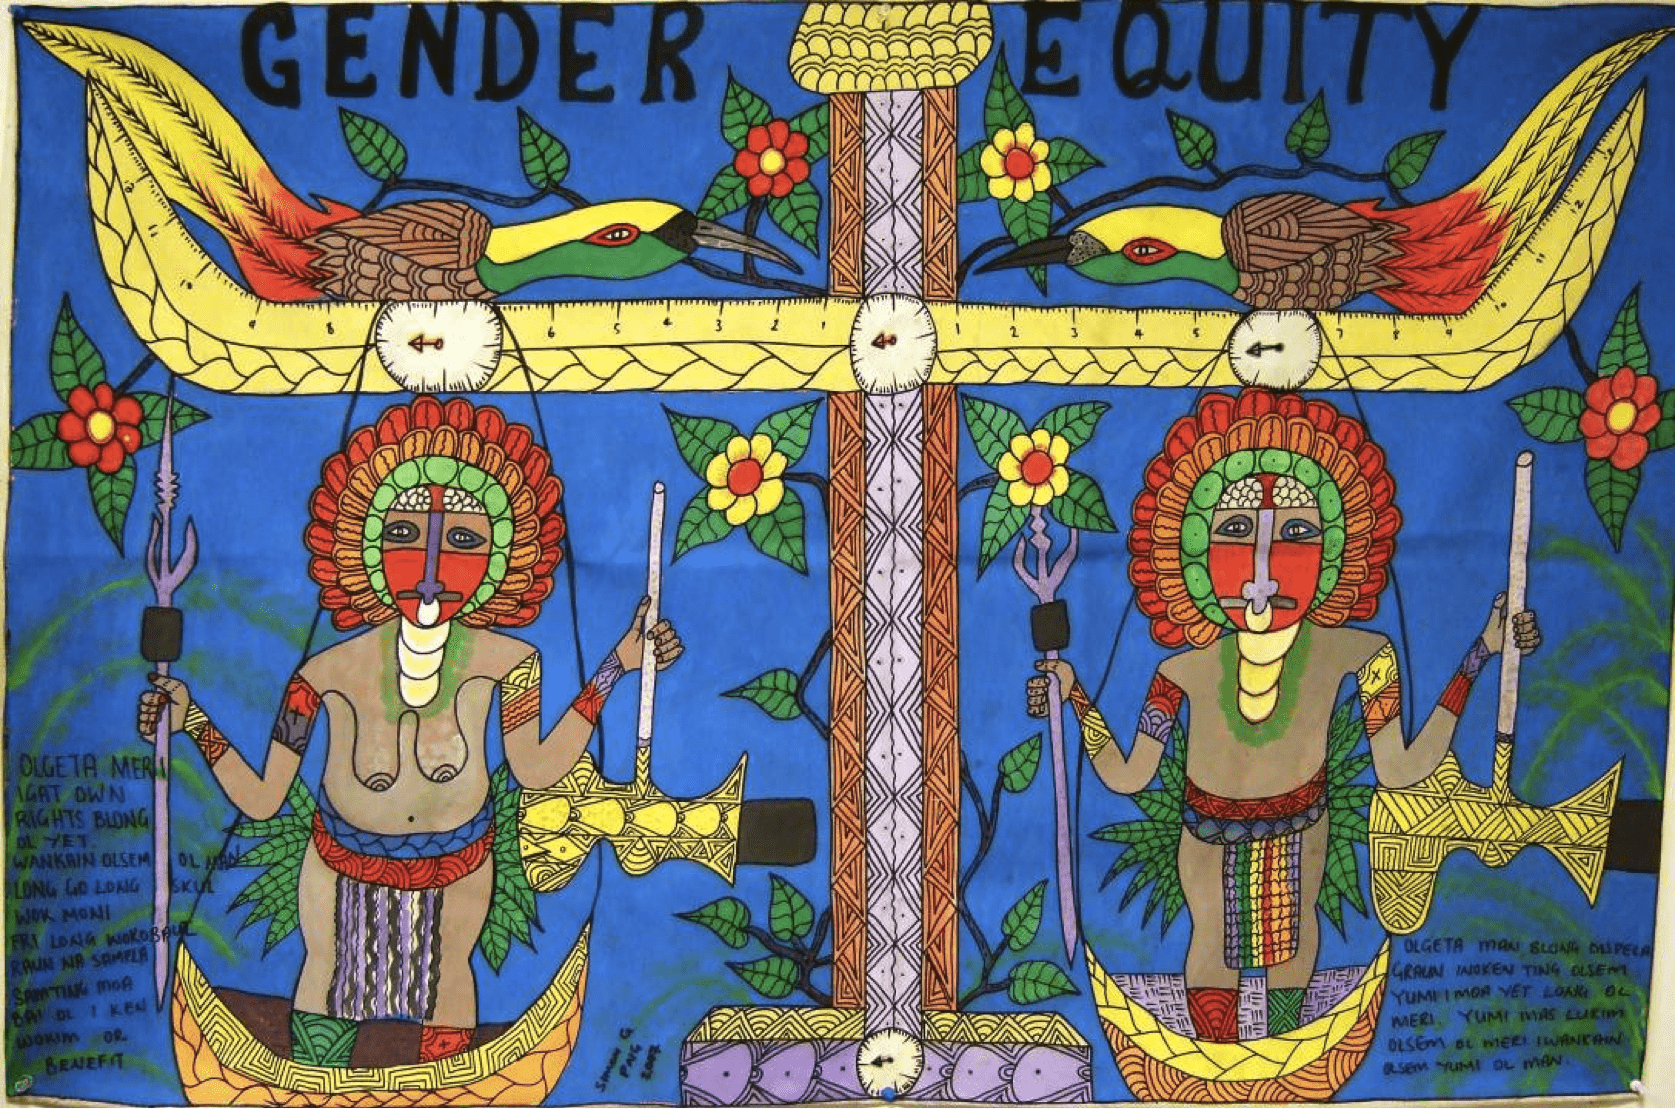 Painting depicting justice and gender equity from Papua New Guinea.